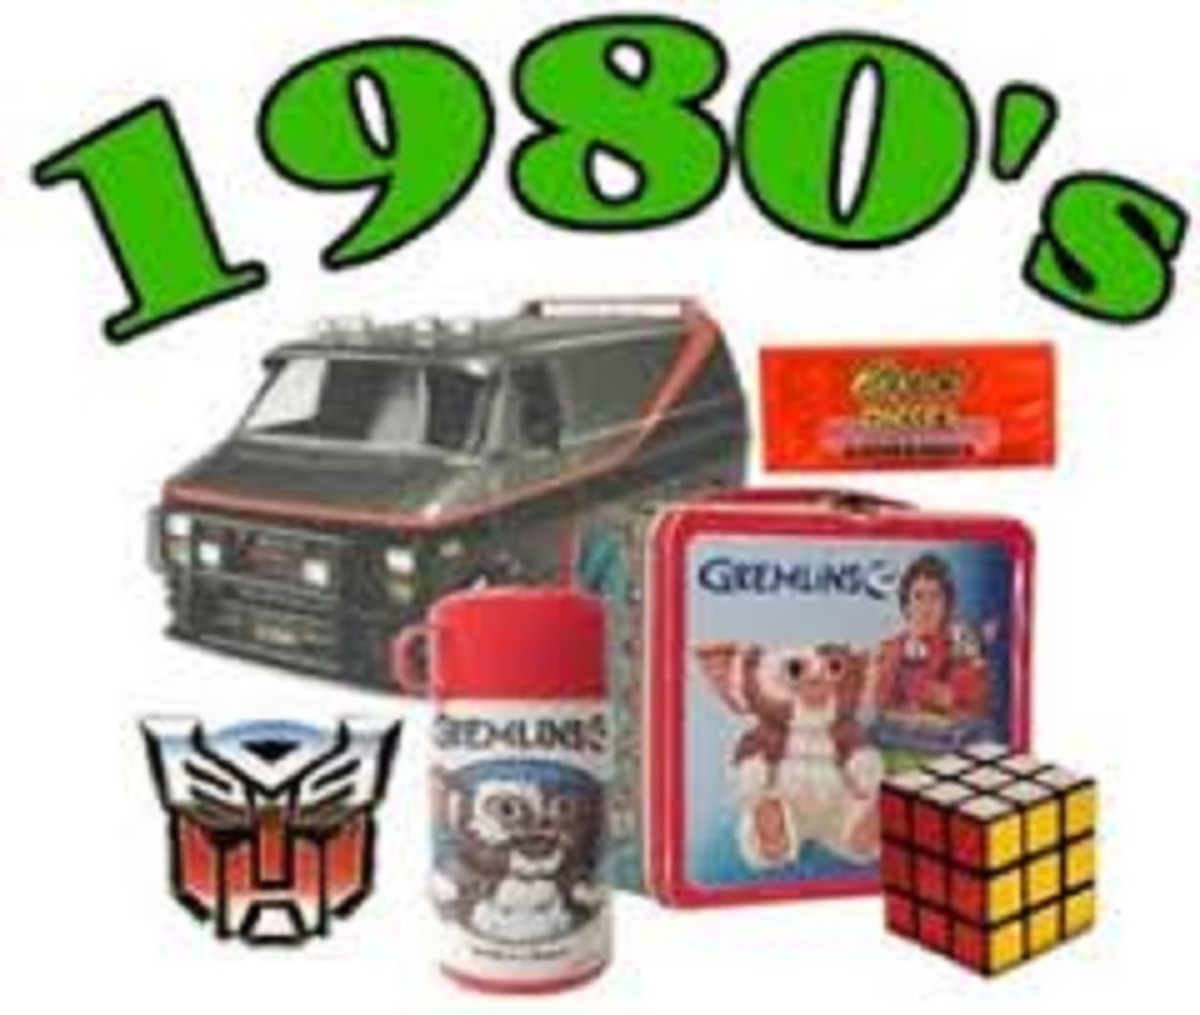 httphubpagescomhubwhat-made-the-80s-so-great-better-than-today